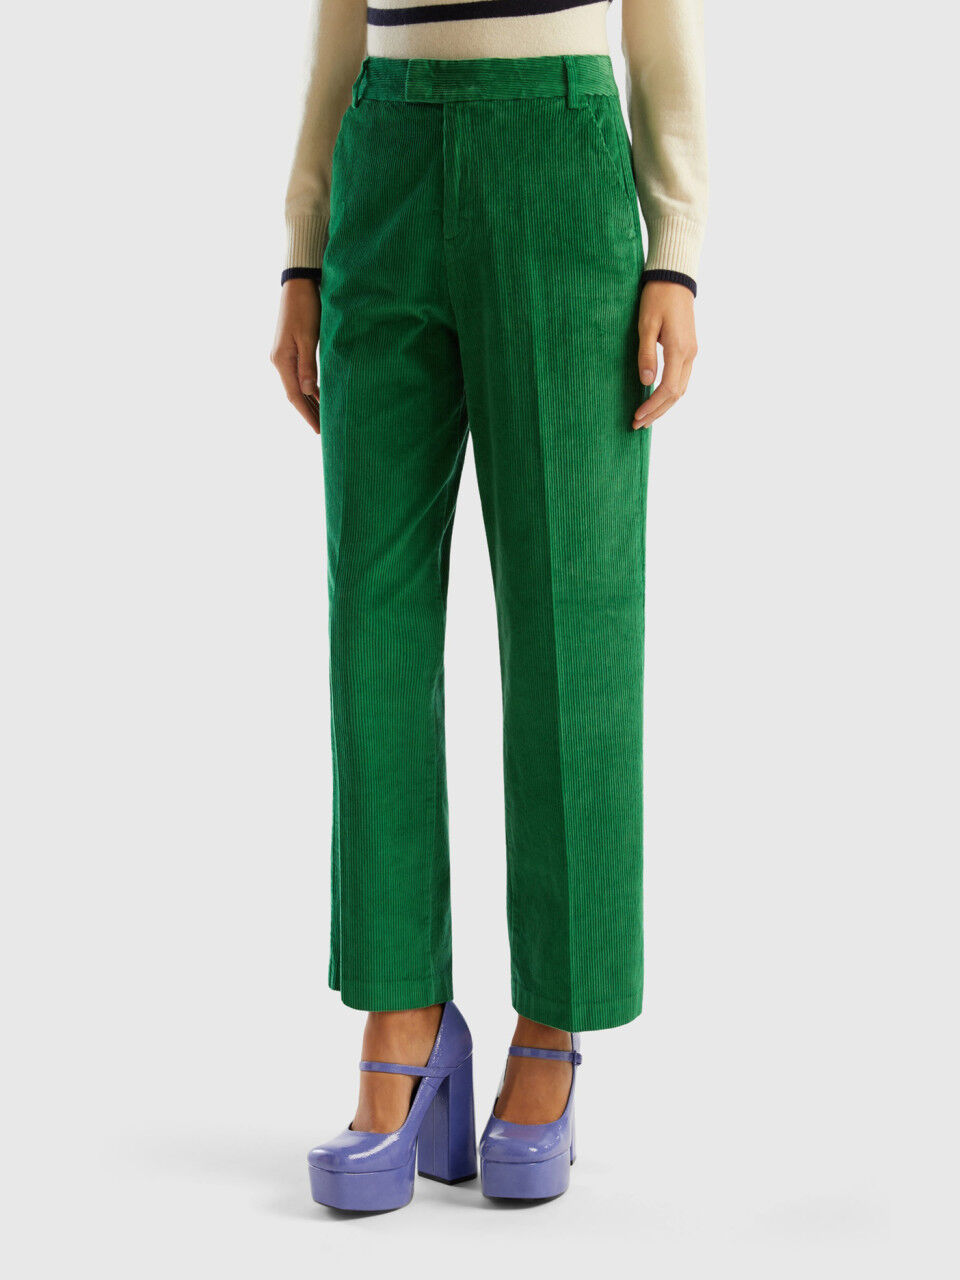 bound Army Green Corduroy Trousers – UN:IK Clothing